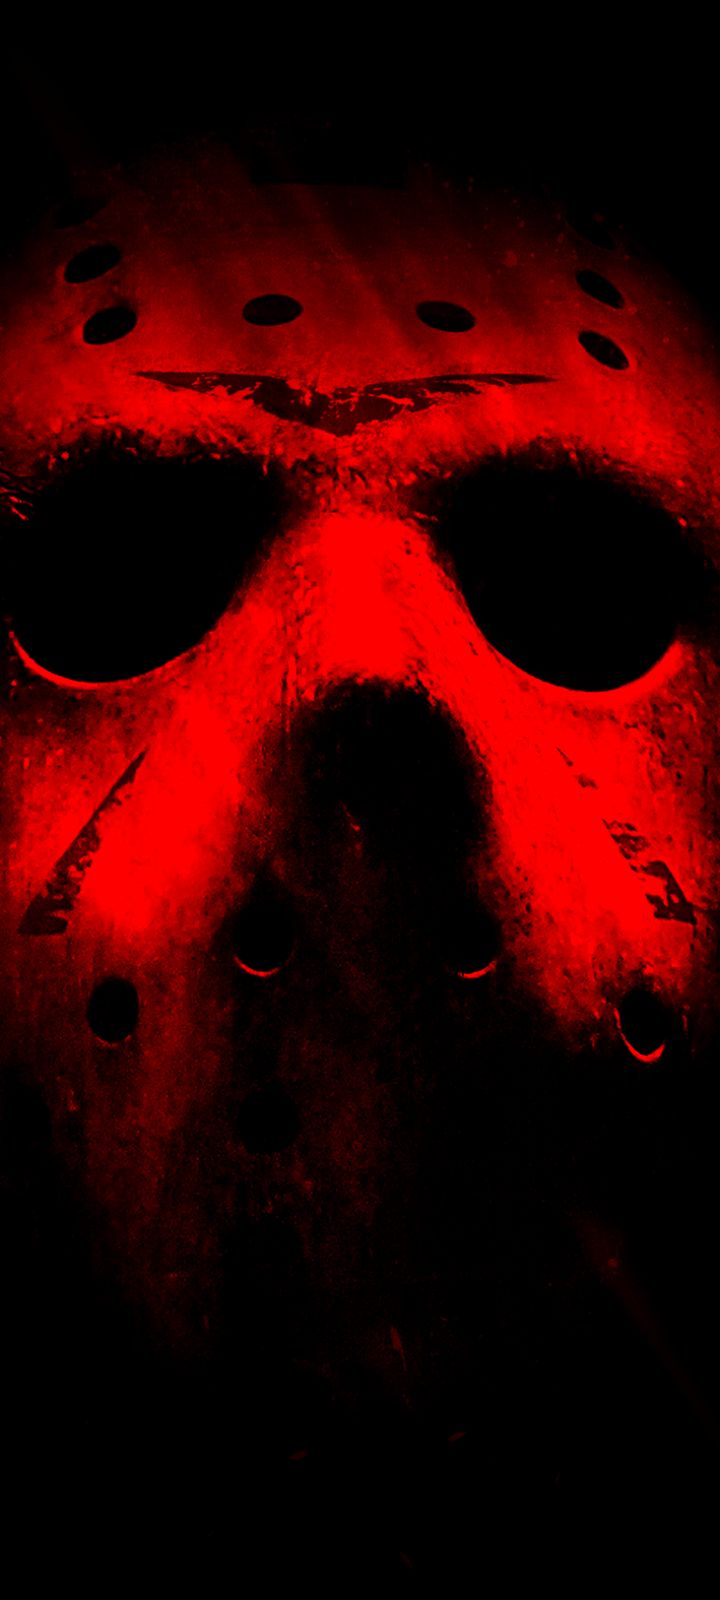 movie, friday the 13th (2009), jason voorhees, friday the 13th